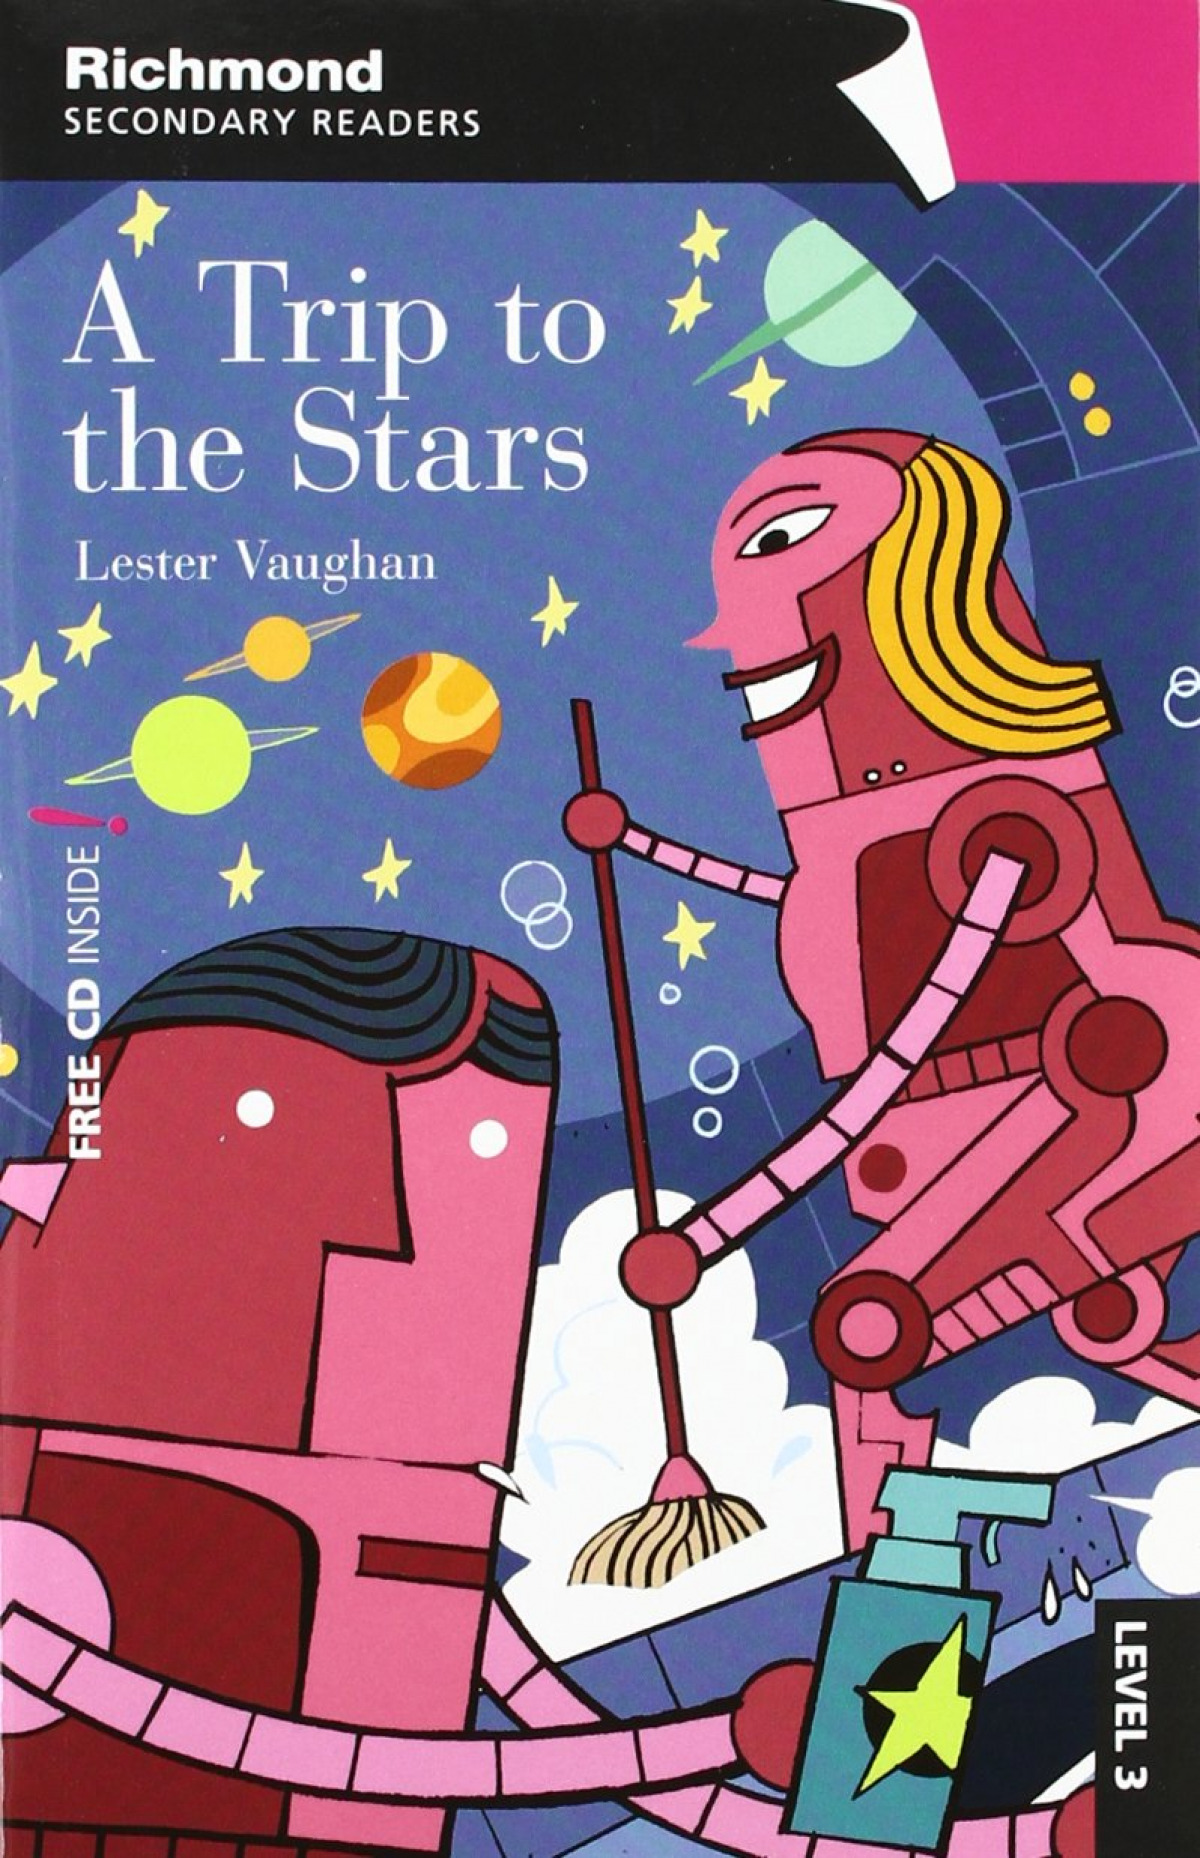 A trip to the stars level 3 richmond secondary readers - Varios autores